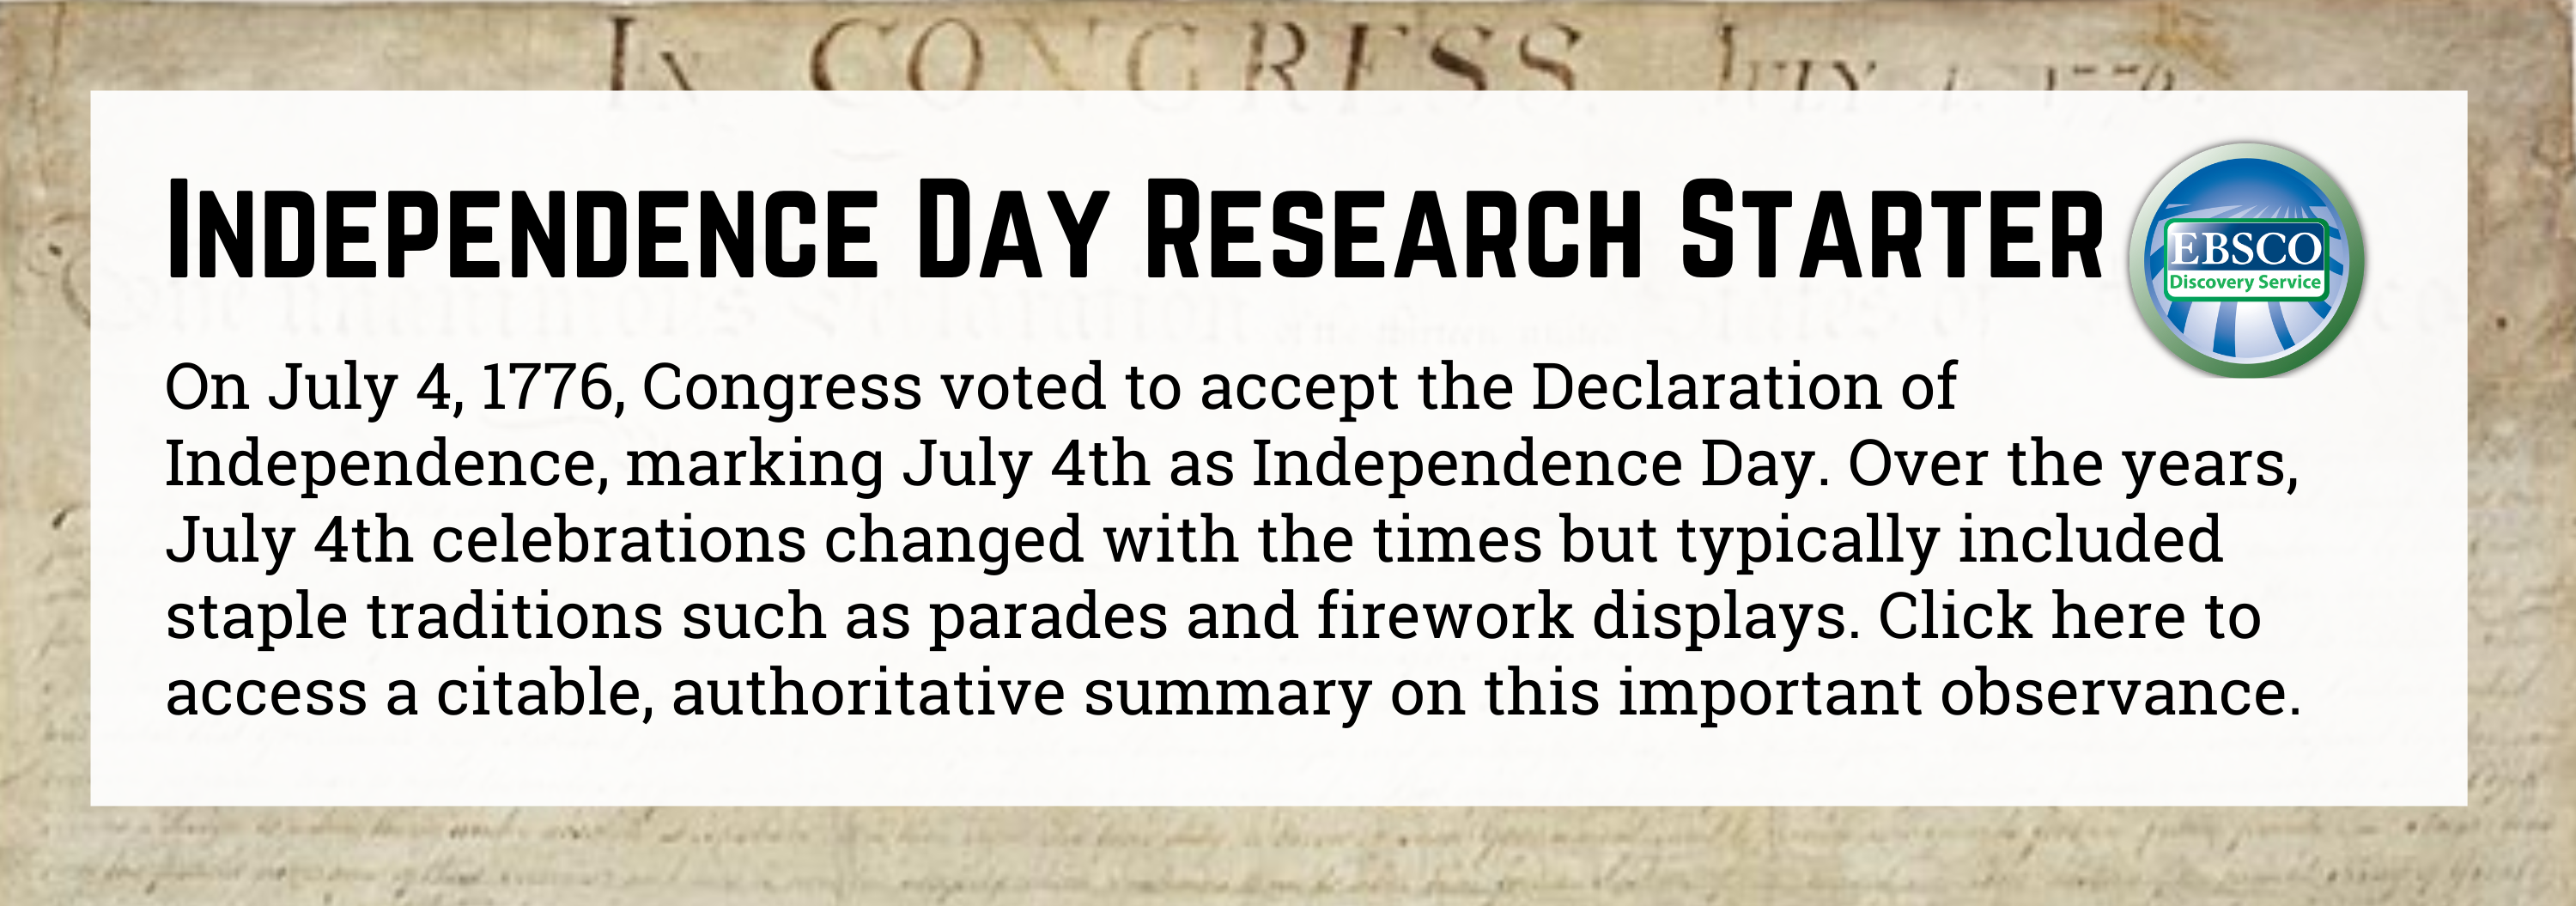 Independence Day Research Starter. Click here to access a citable, authoritative summary on this important observance.